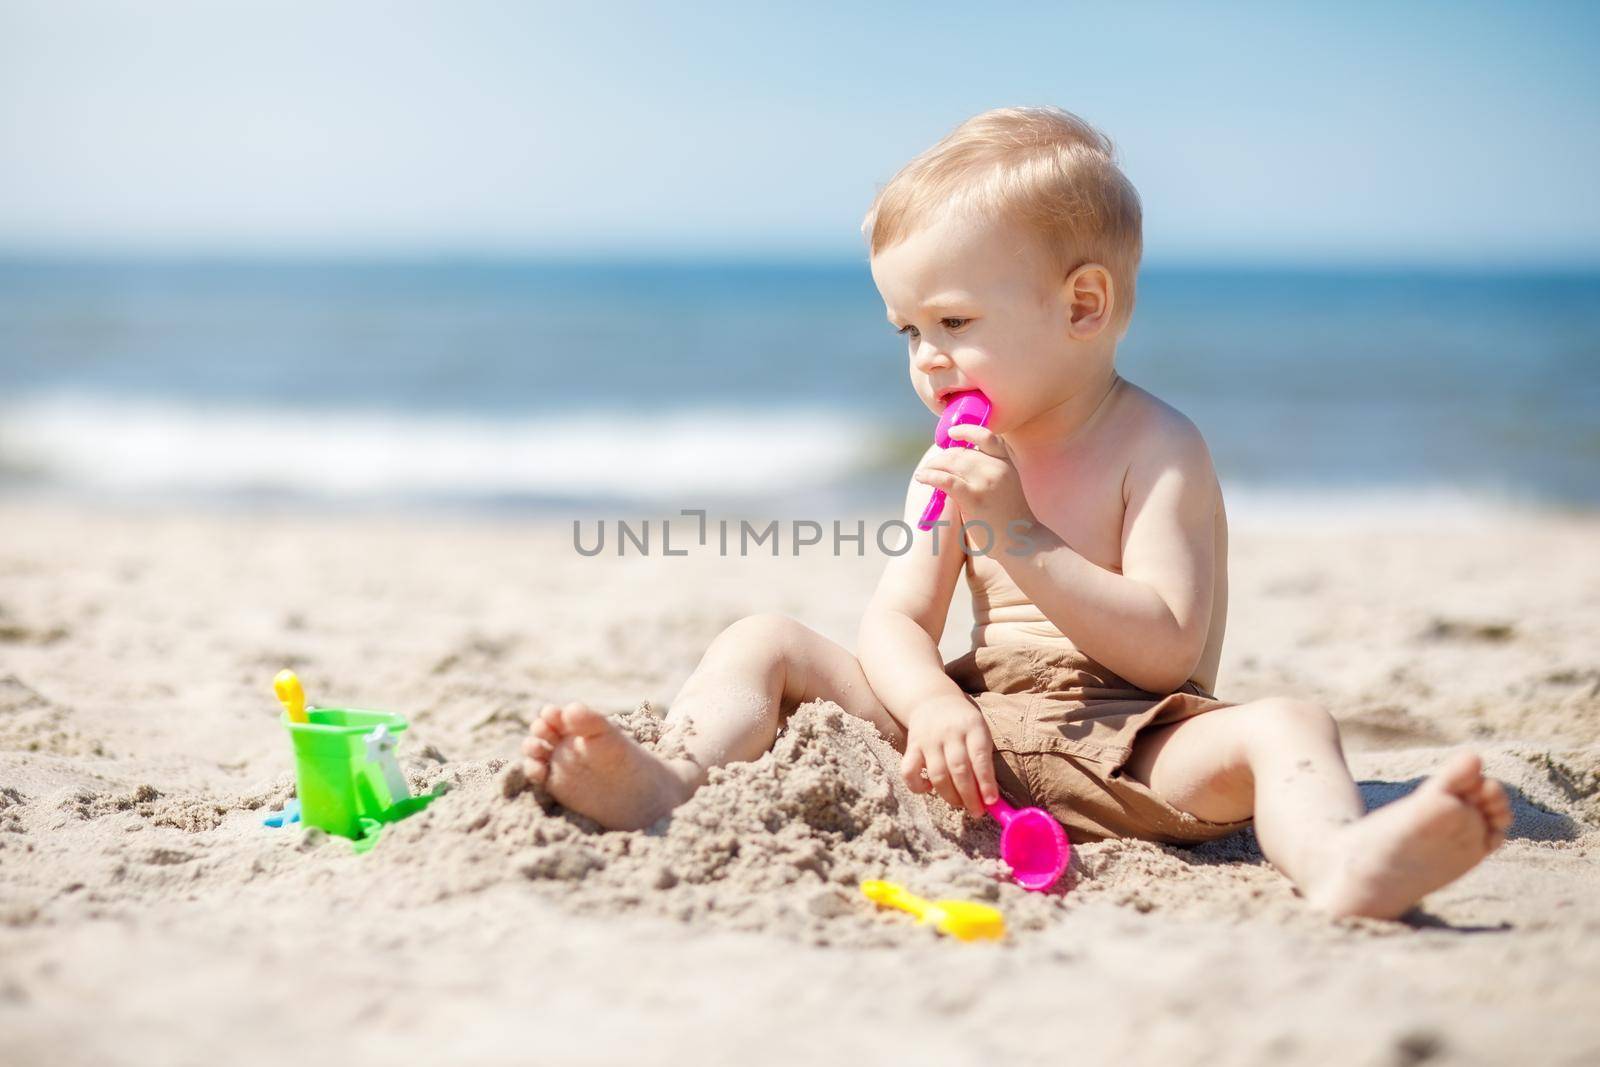 Little boy playing on the beach with sand beach toys. The boy is thinking about what to make of sand